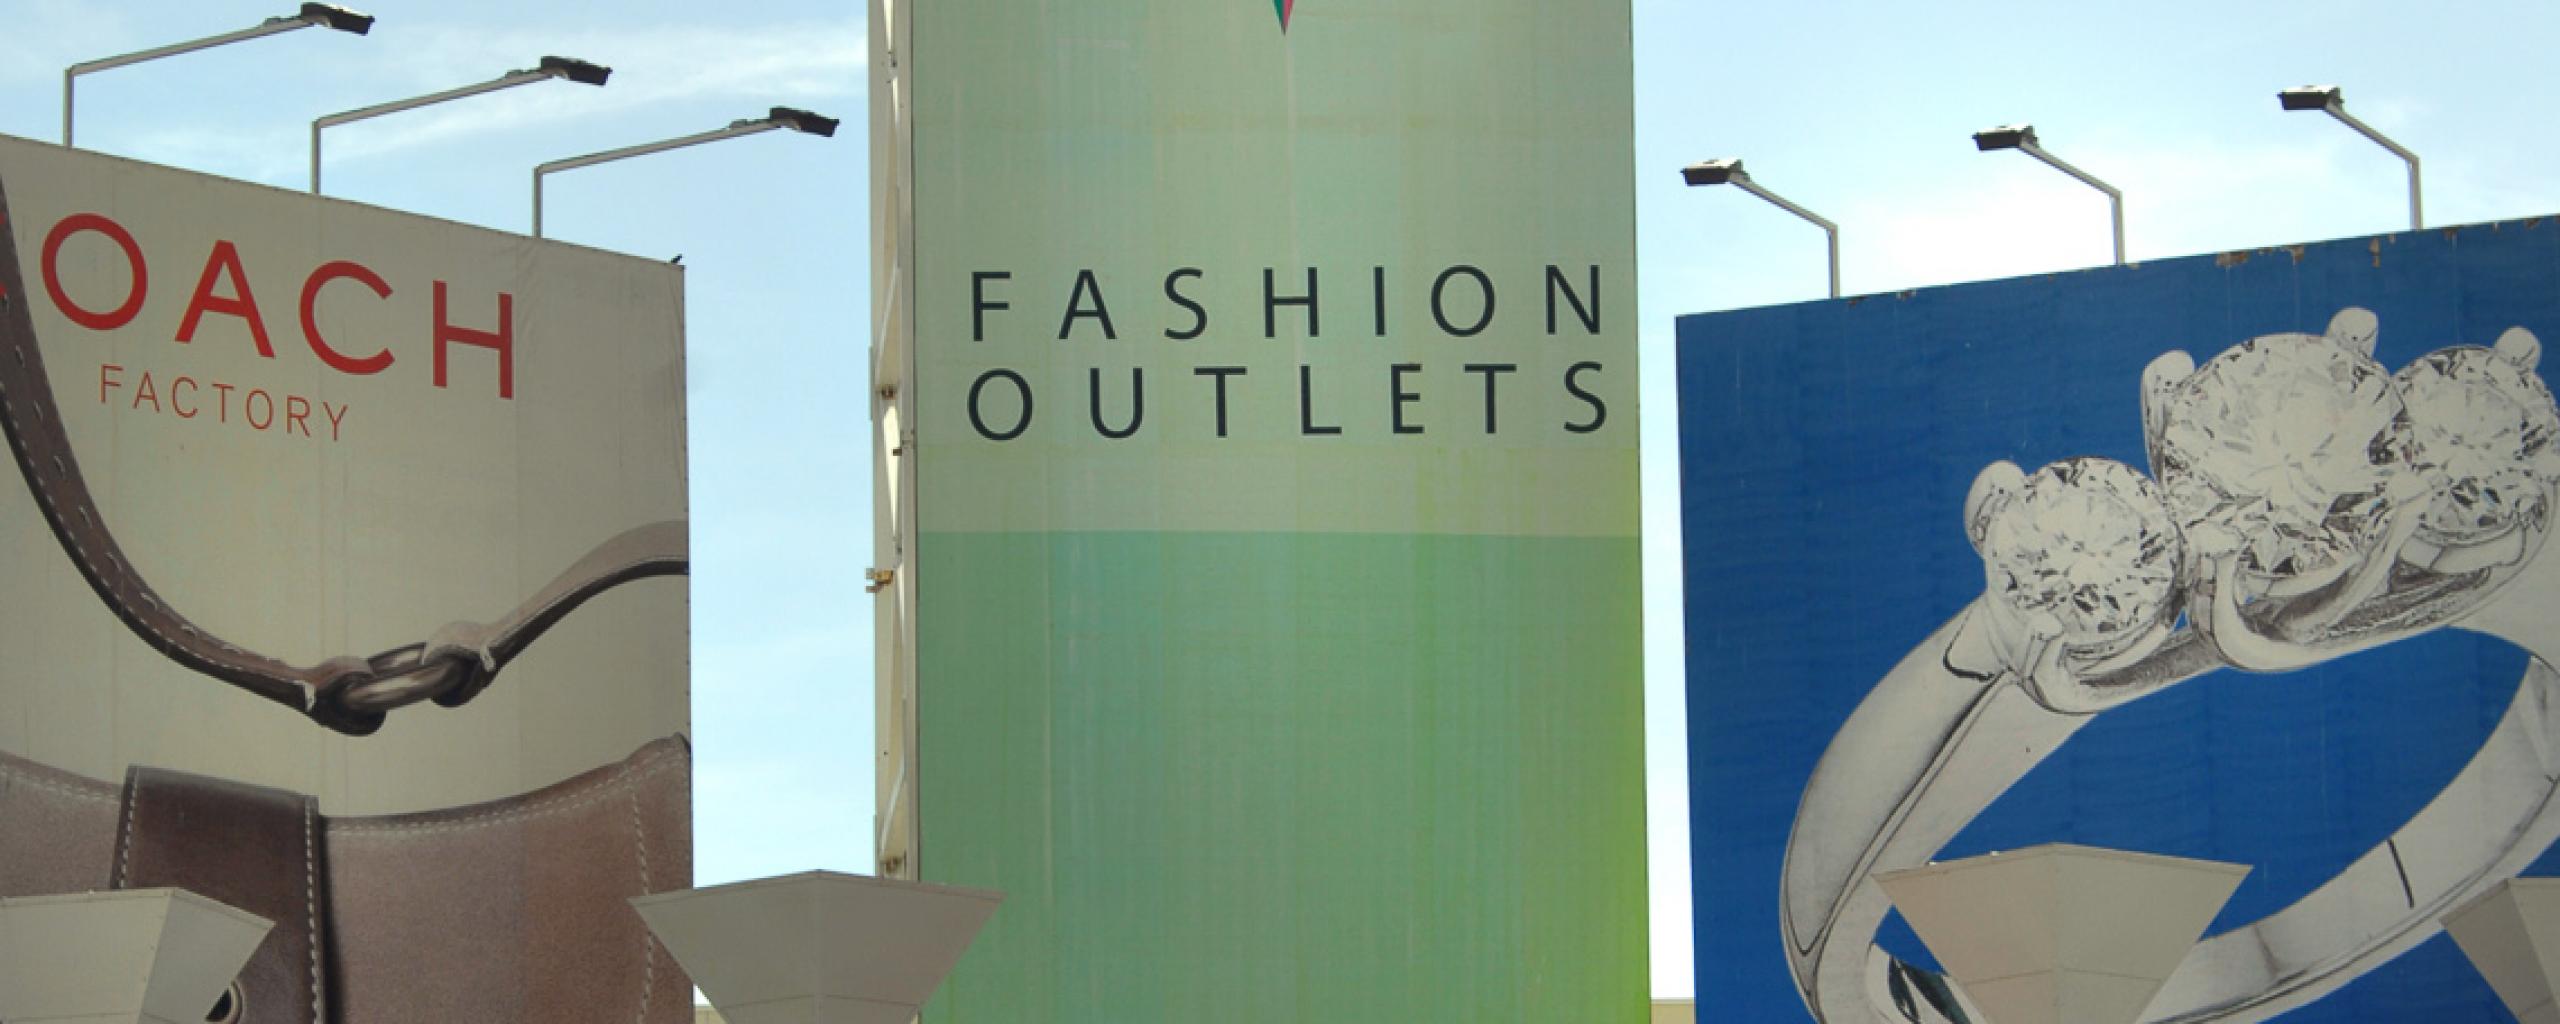 24 Hours Shopping - Fashion Outlets